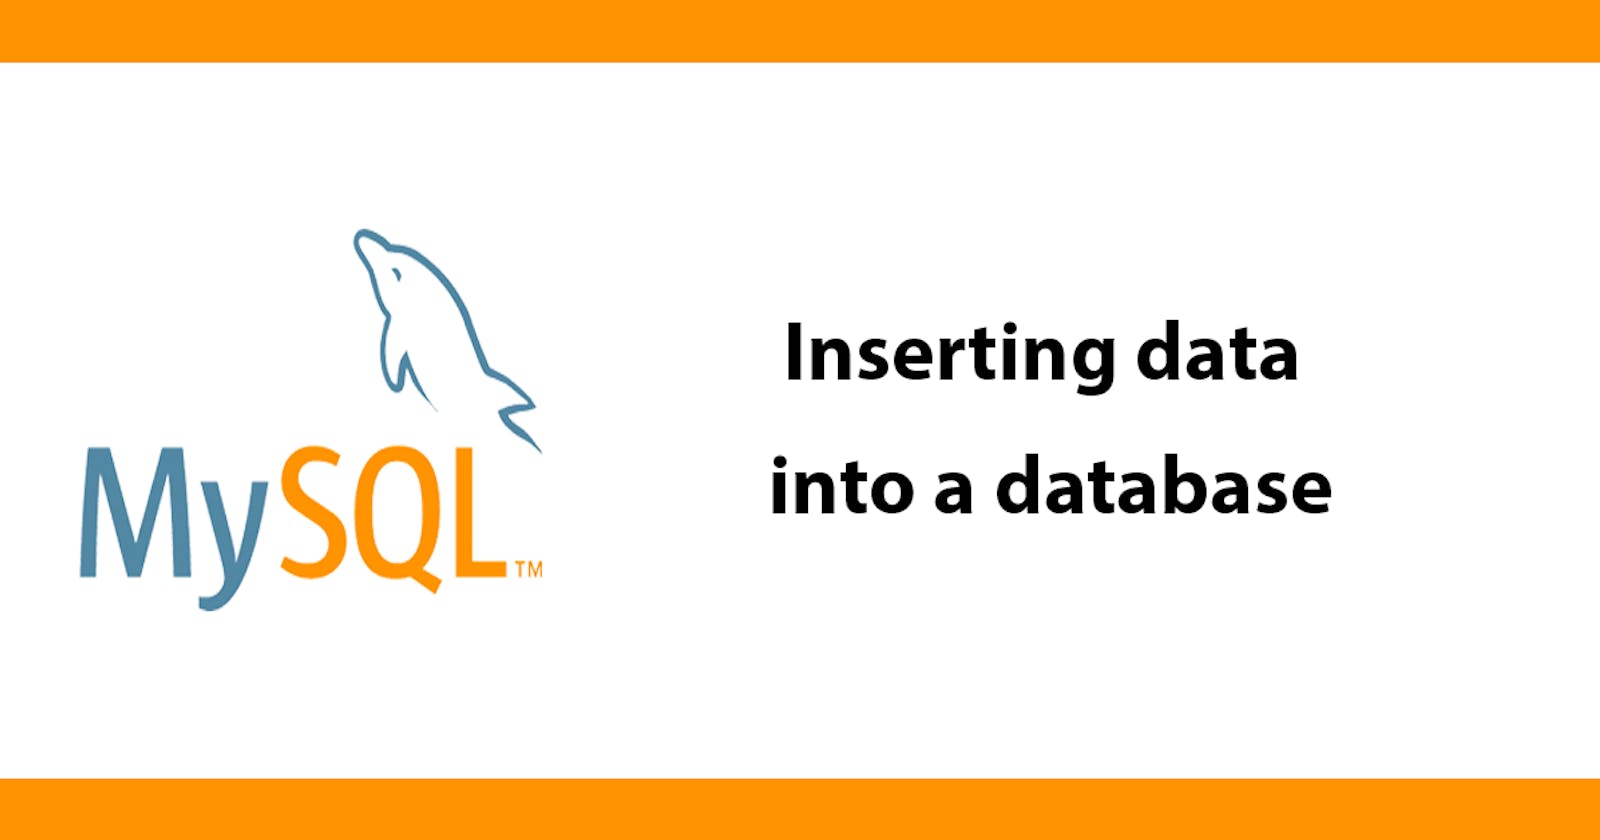 Inserting data into a database